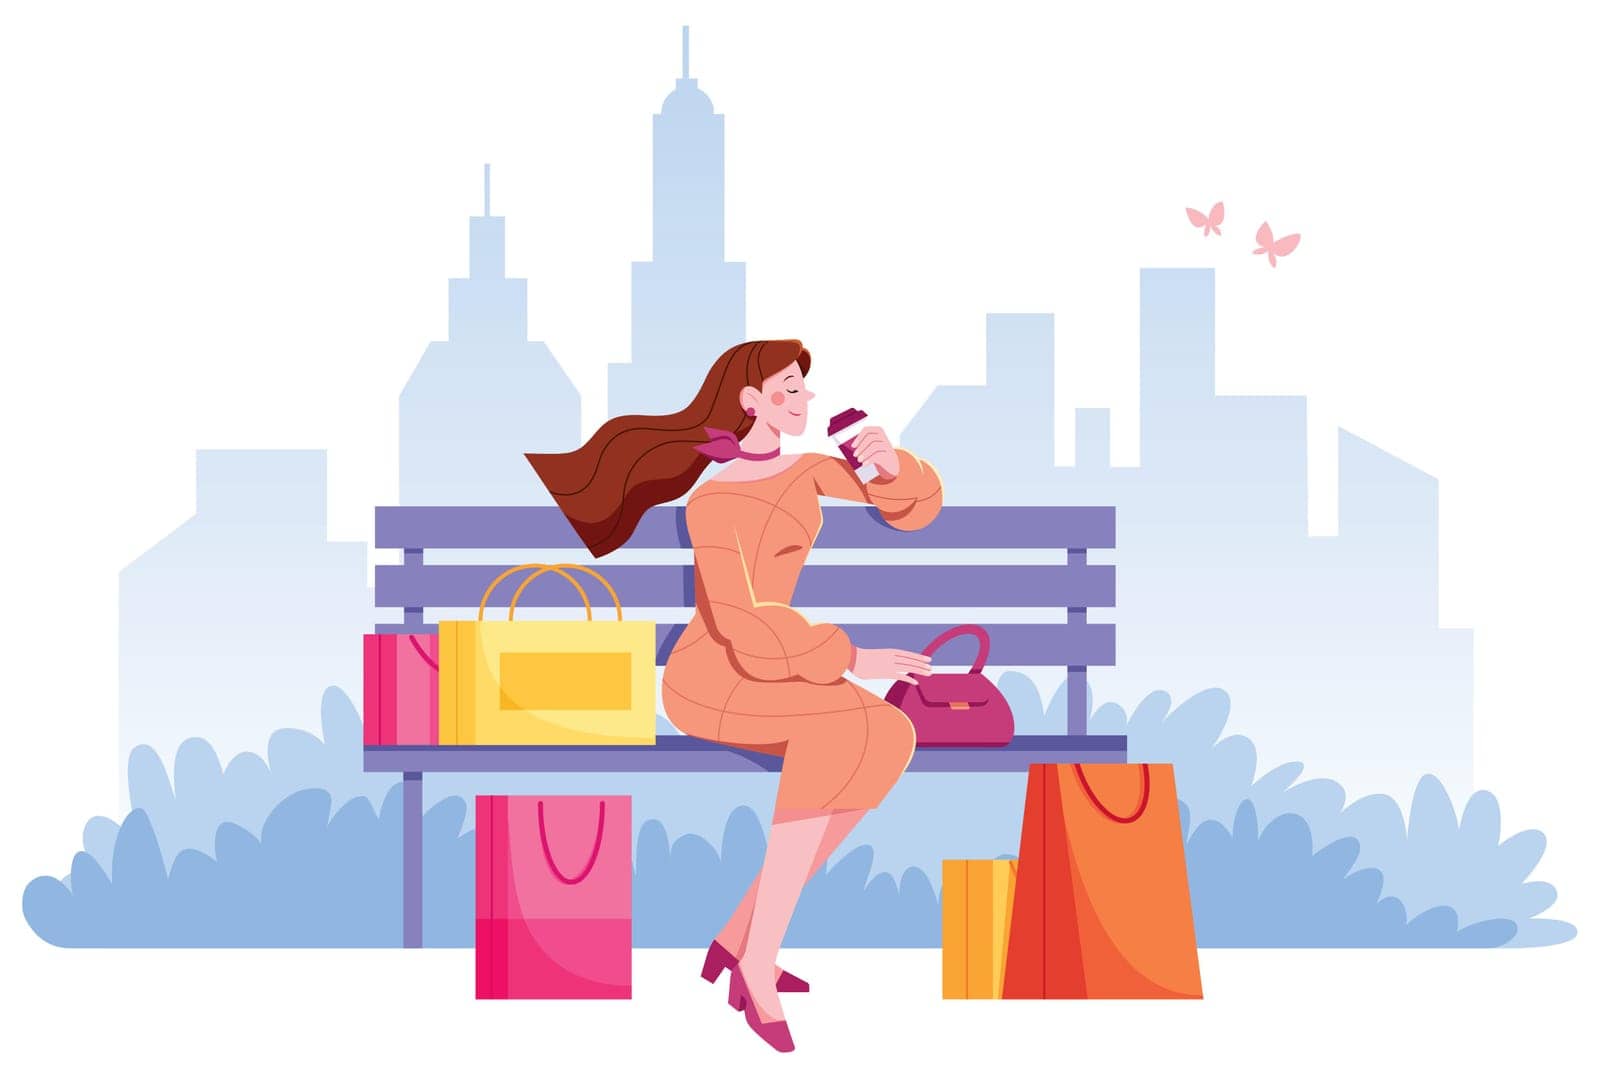 Flat design illustration with young woman resting on bench after a day of shopping.